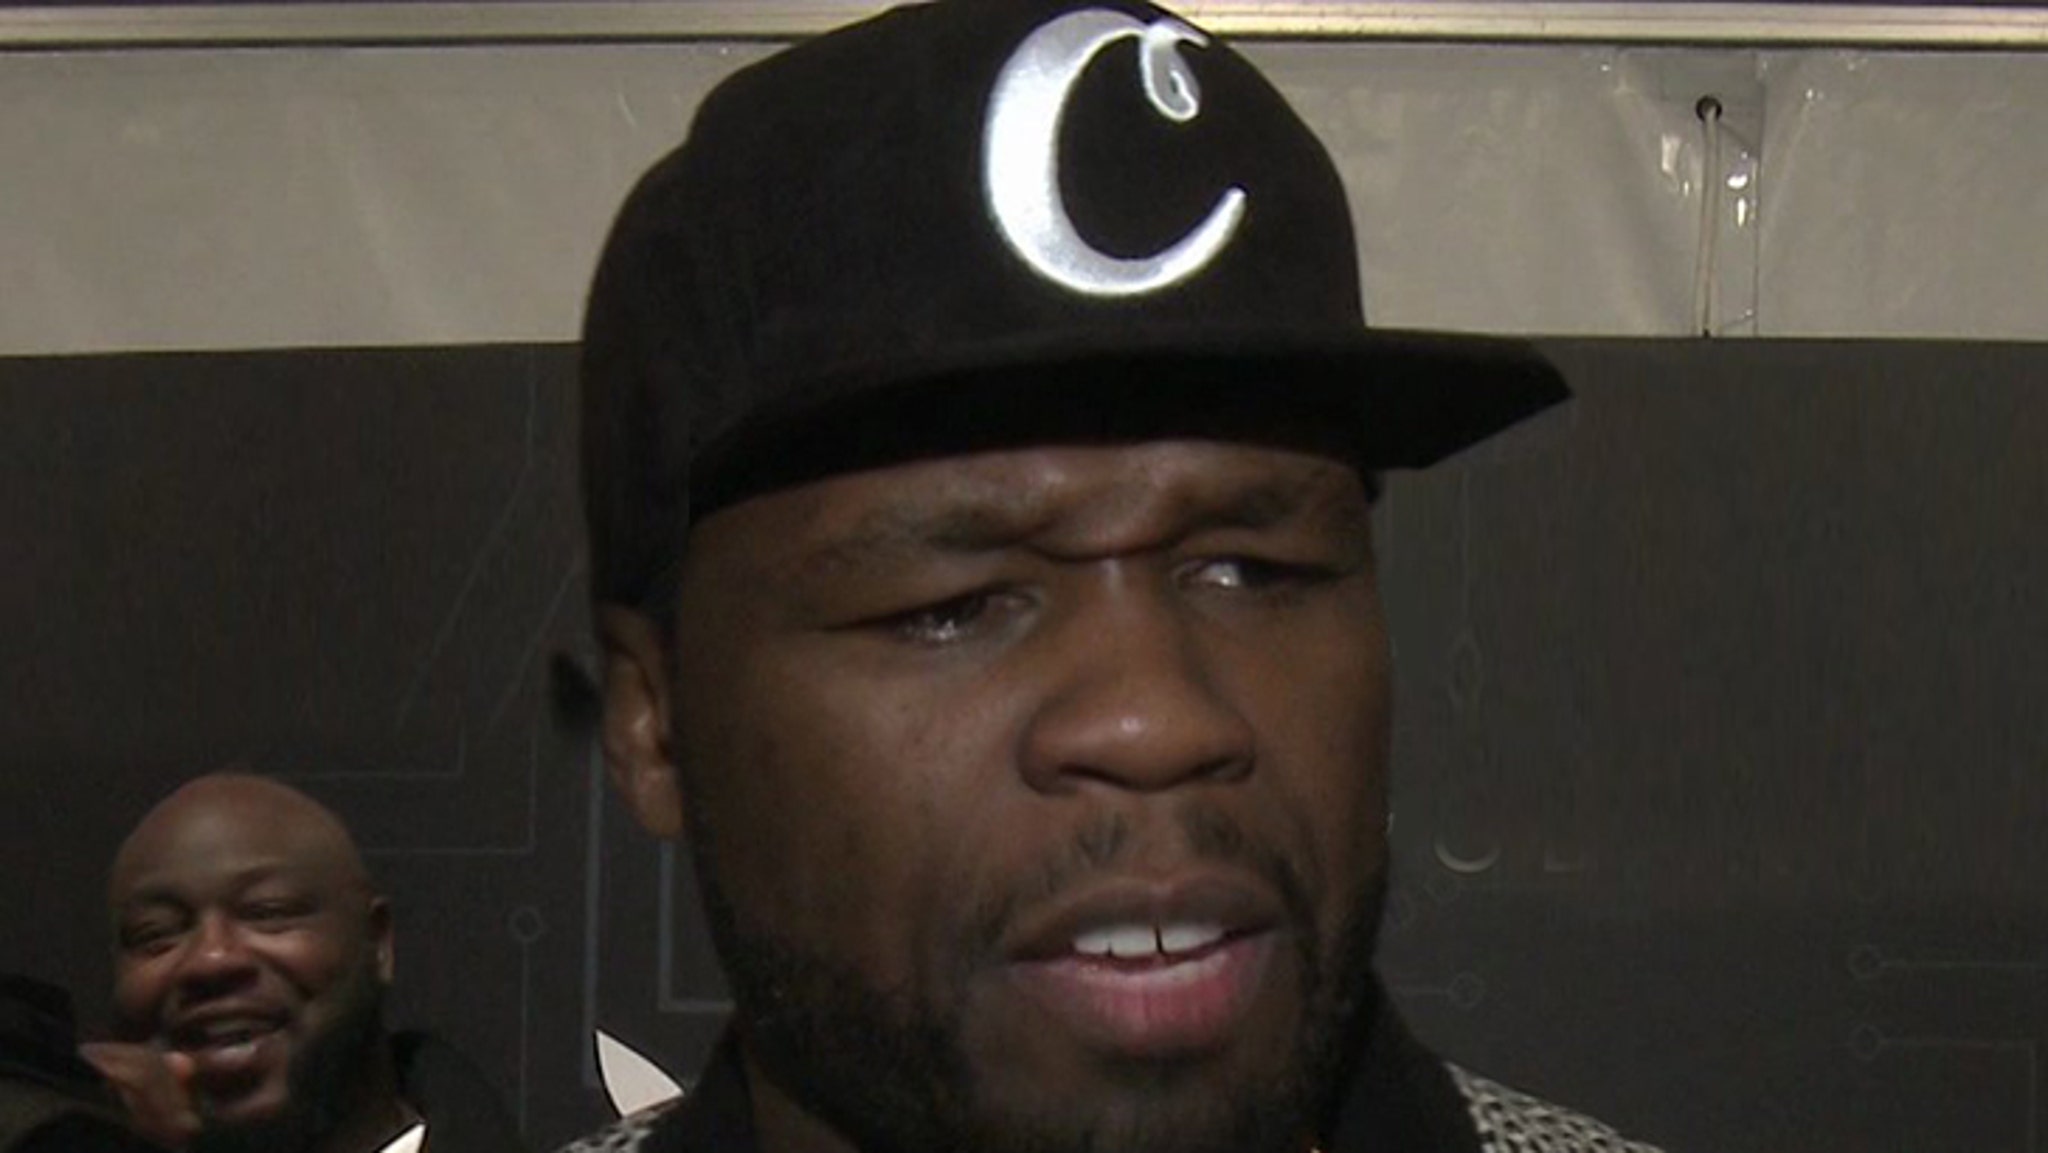 50 Cent Swears Under Oath He Doesn't Own Bitcoin